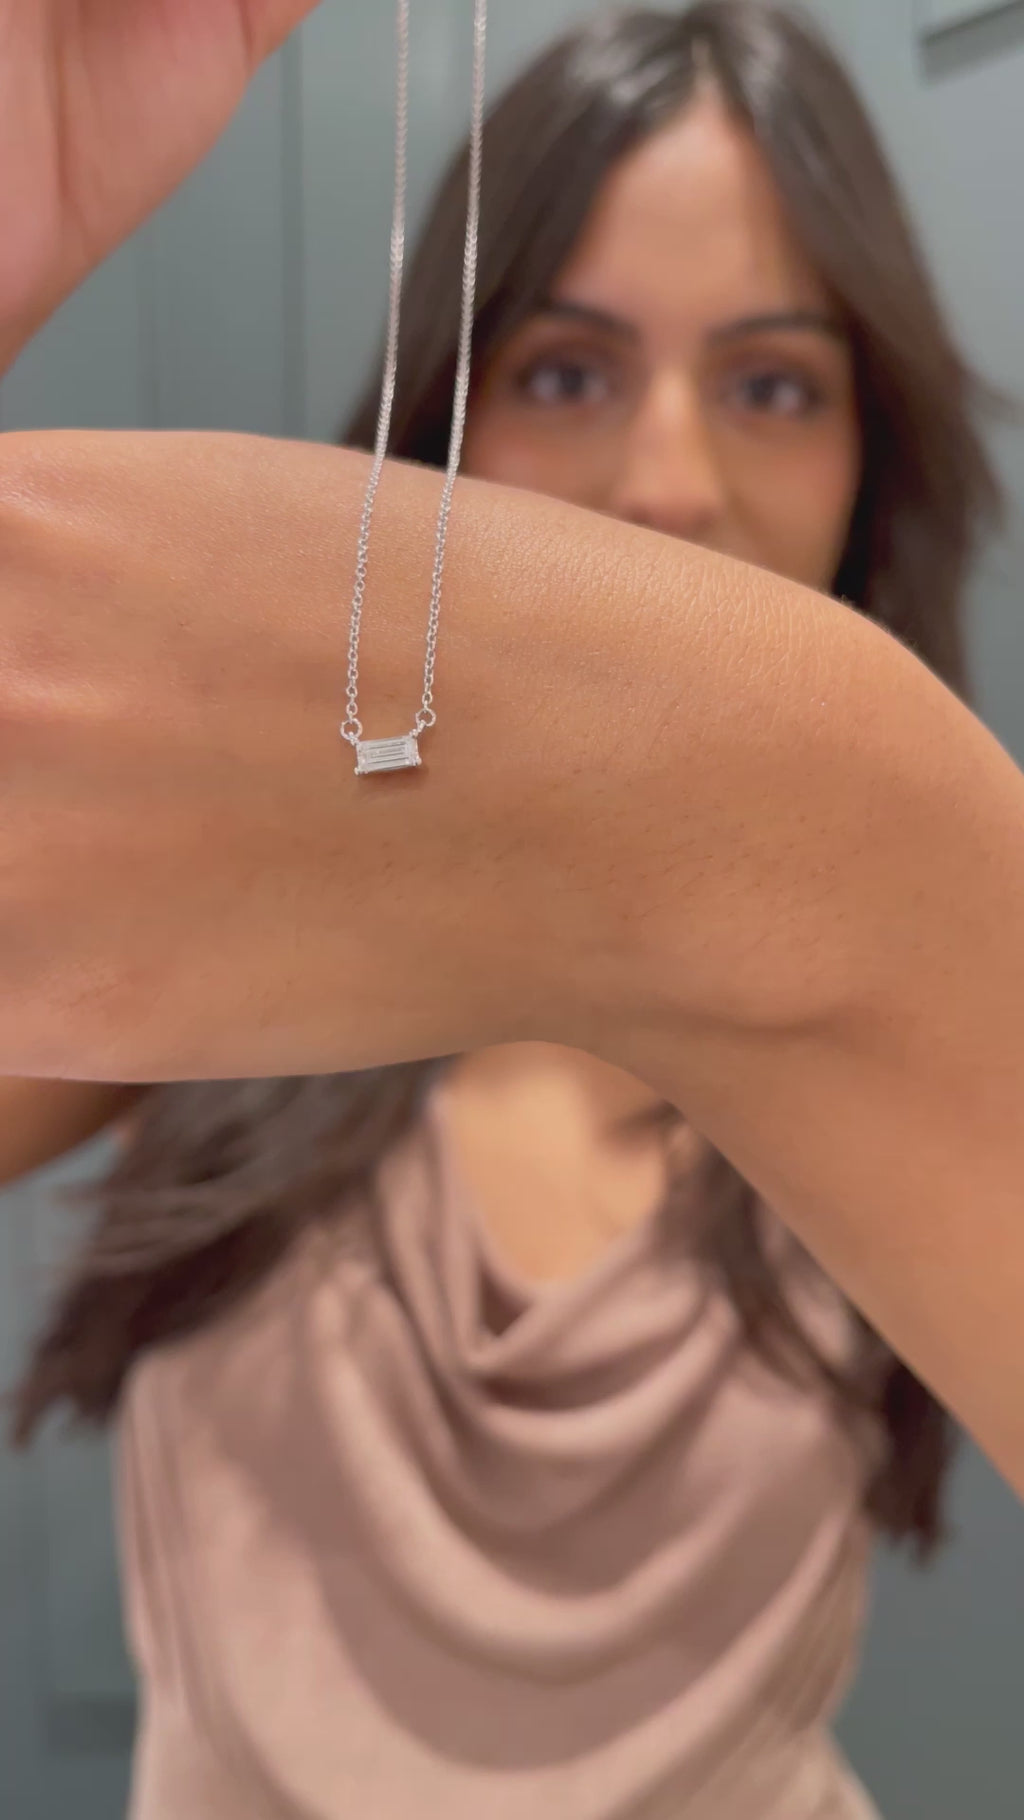 Get ready with me jewelry style! Our 4 CTW Lab-Grown Diamond Necklace is stunning layered with your other favorite necklaces